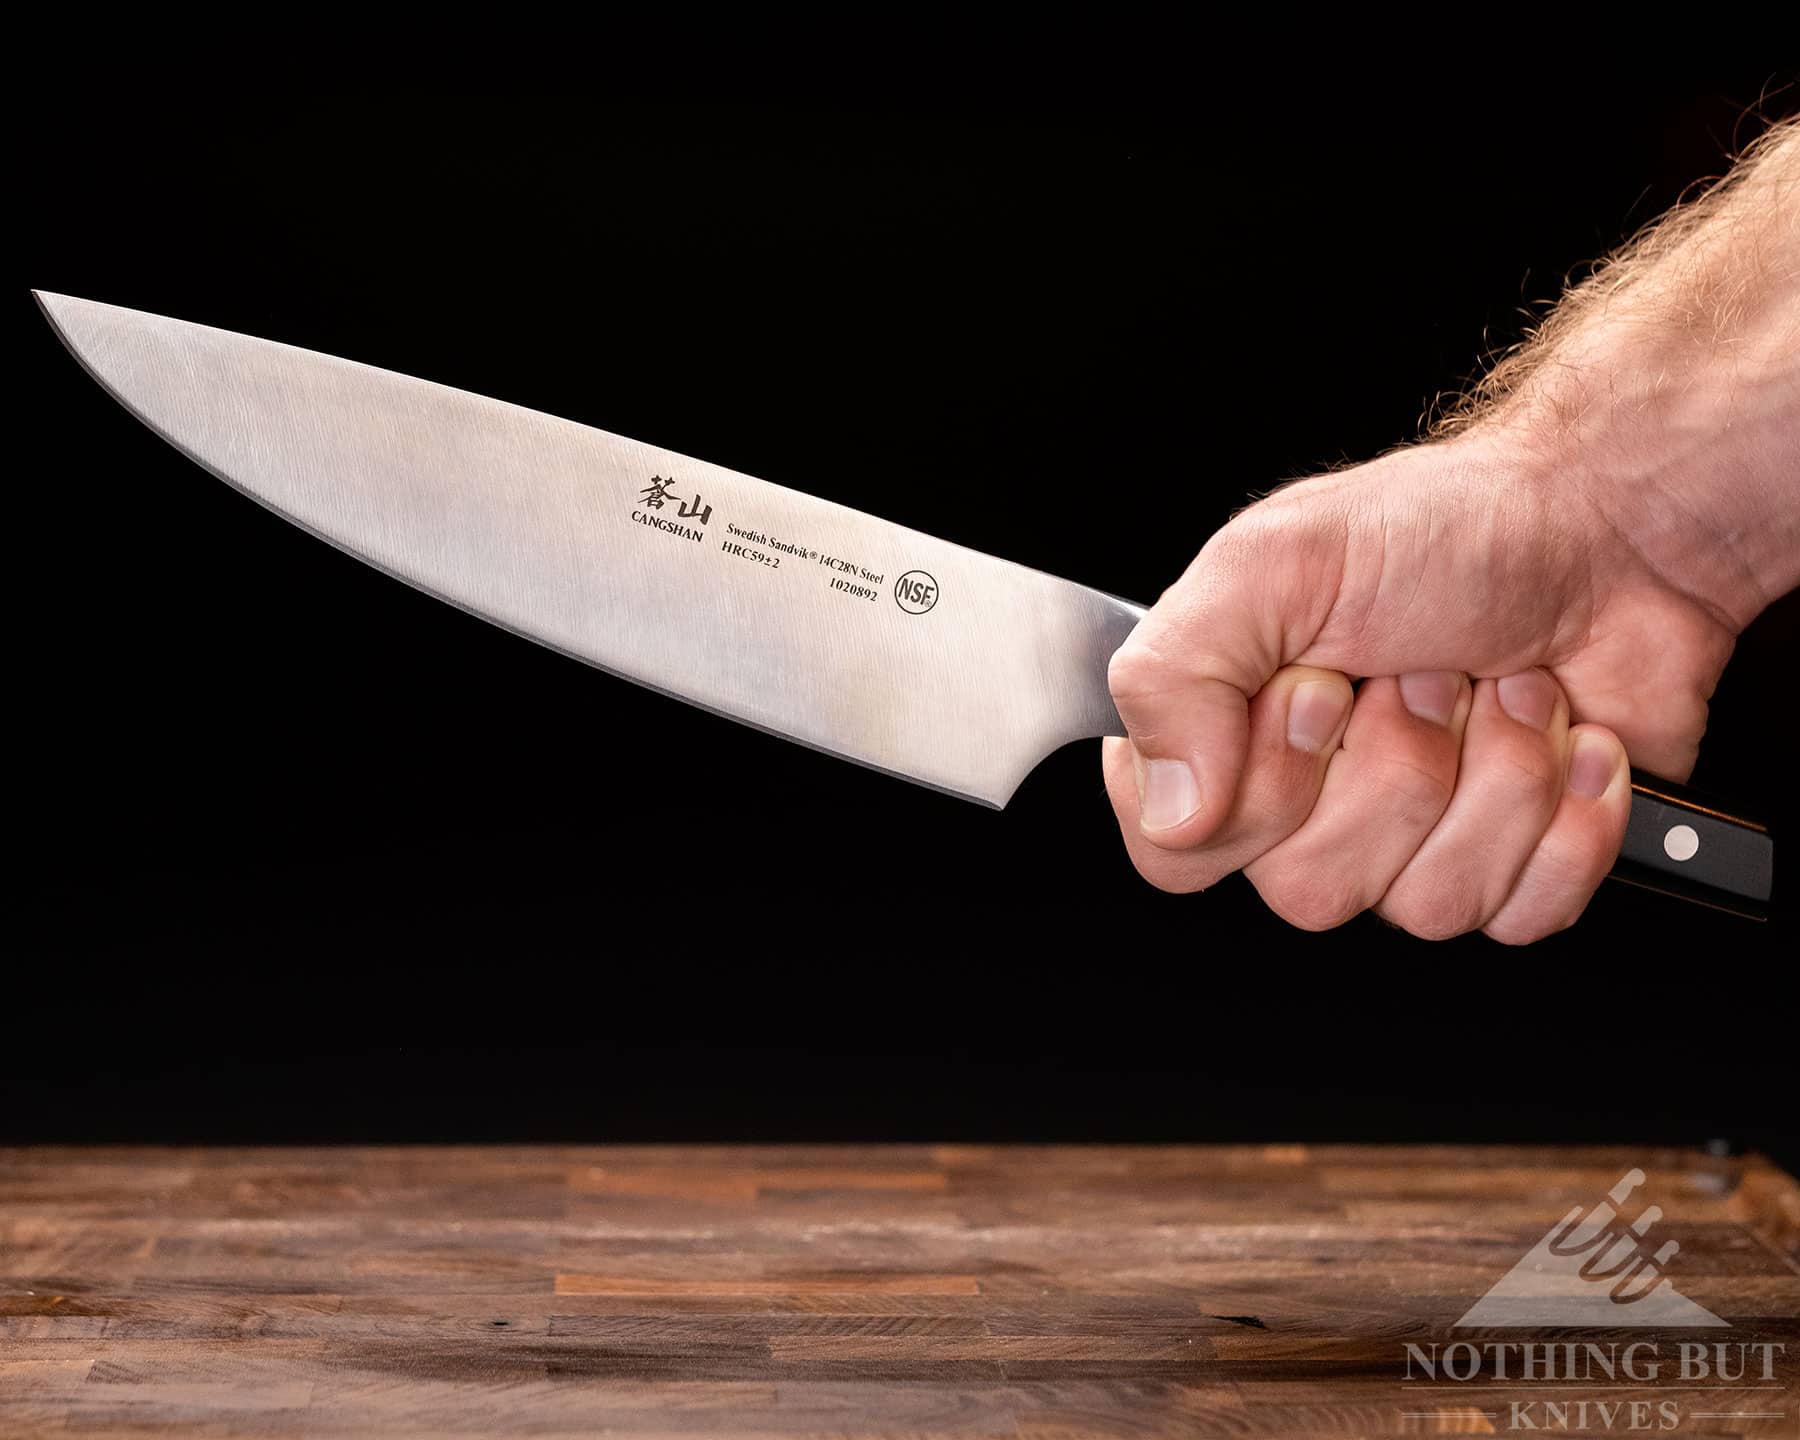 Cangshan Z Series Chef's Knife Review - Very strange knife. Not too bad  